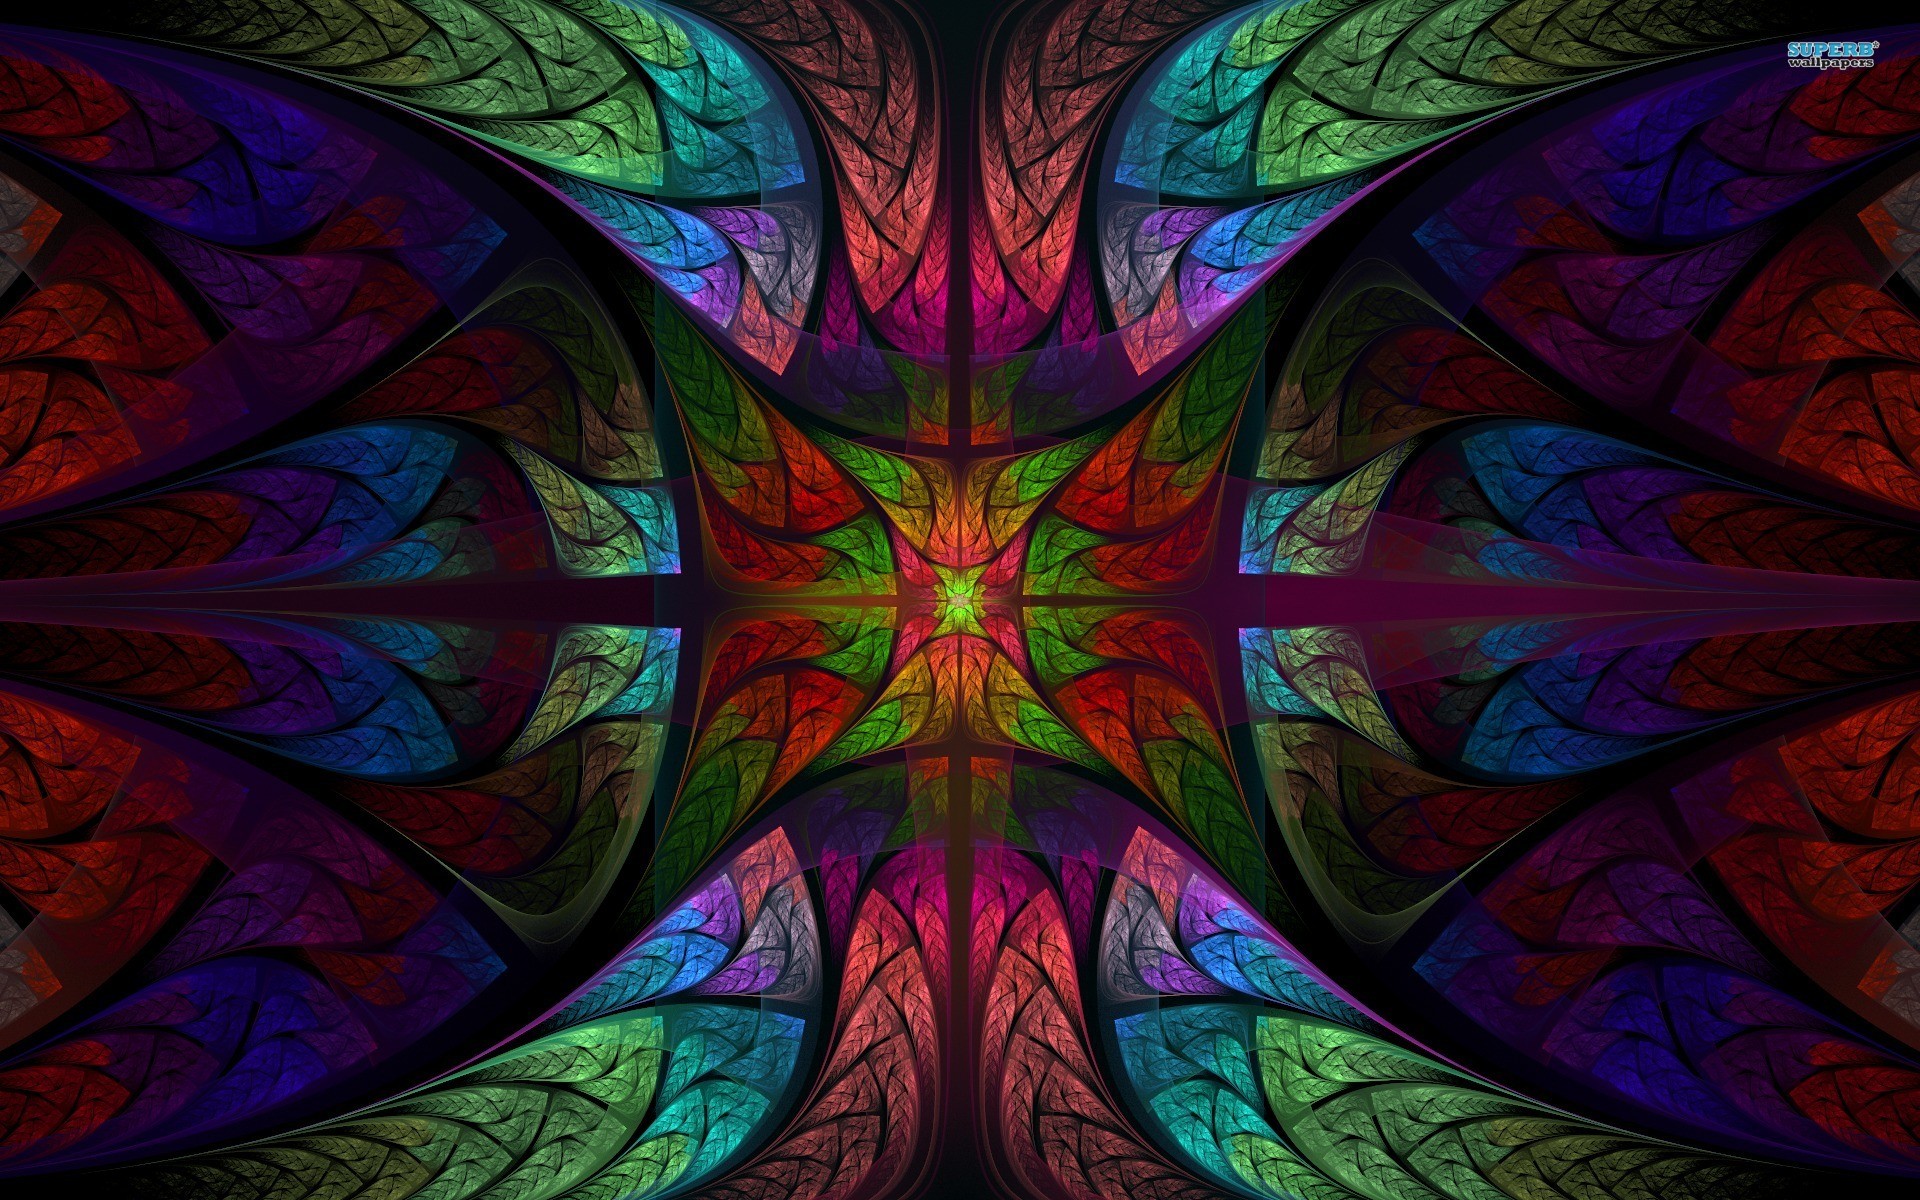 stained glass wallpaper,psychedelic art,fractal art,stained glass,symmetry,pattern